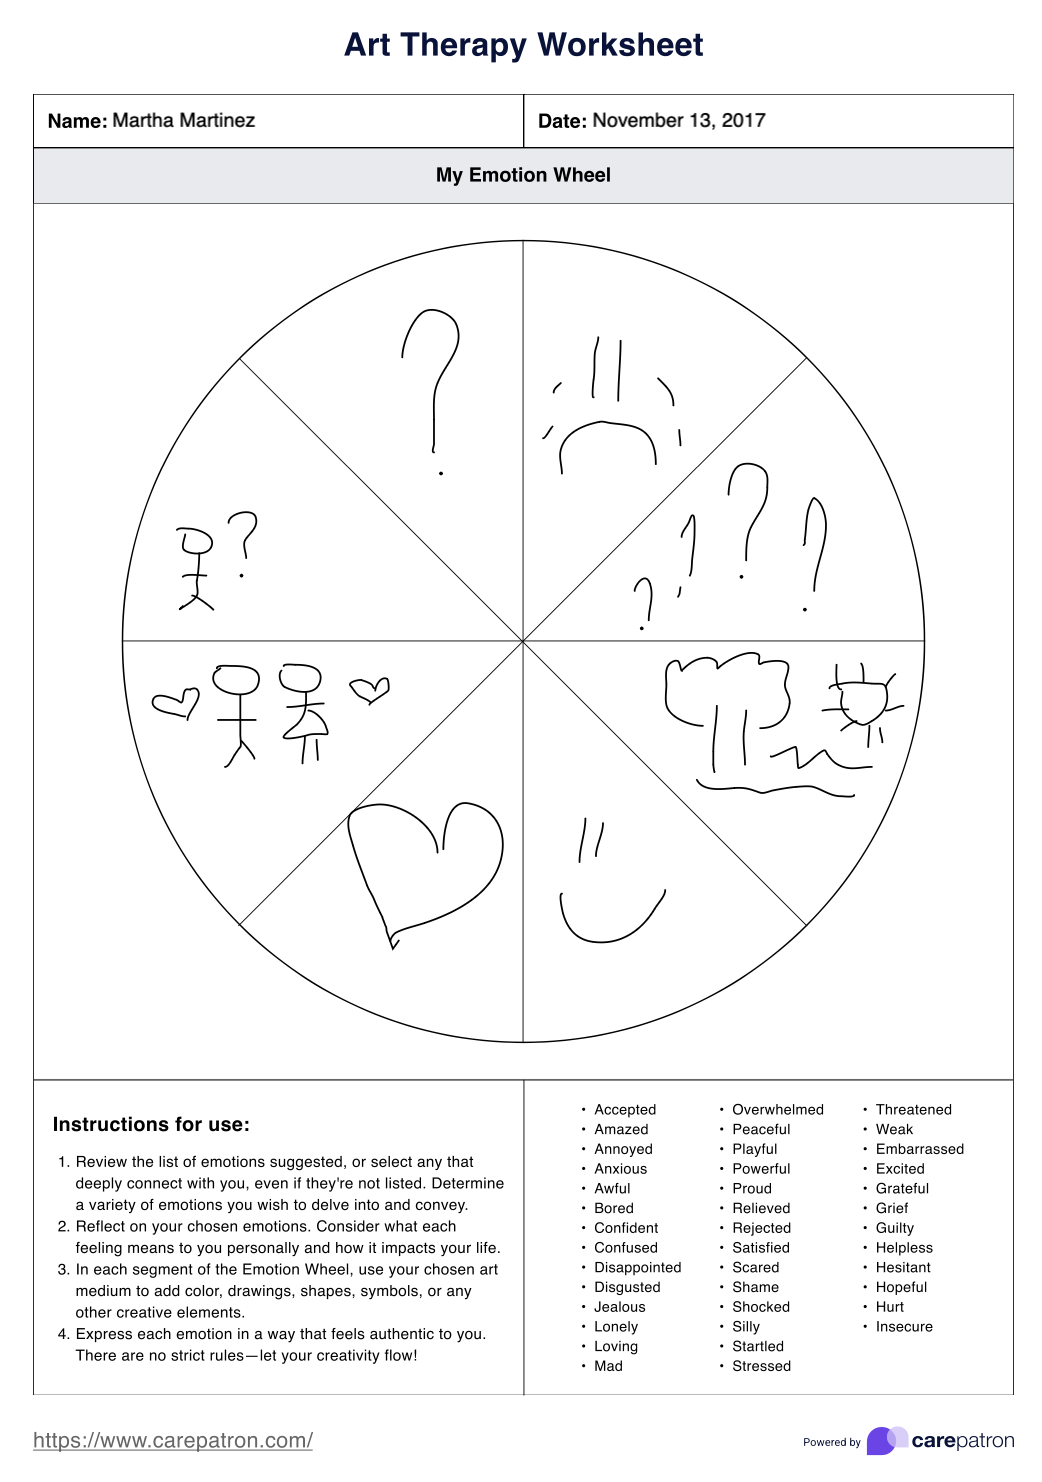 Art Therapy Worksheets &amp;amp; Example | Free Pdf Download - Free Printable Art Therapy Worksheets